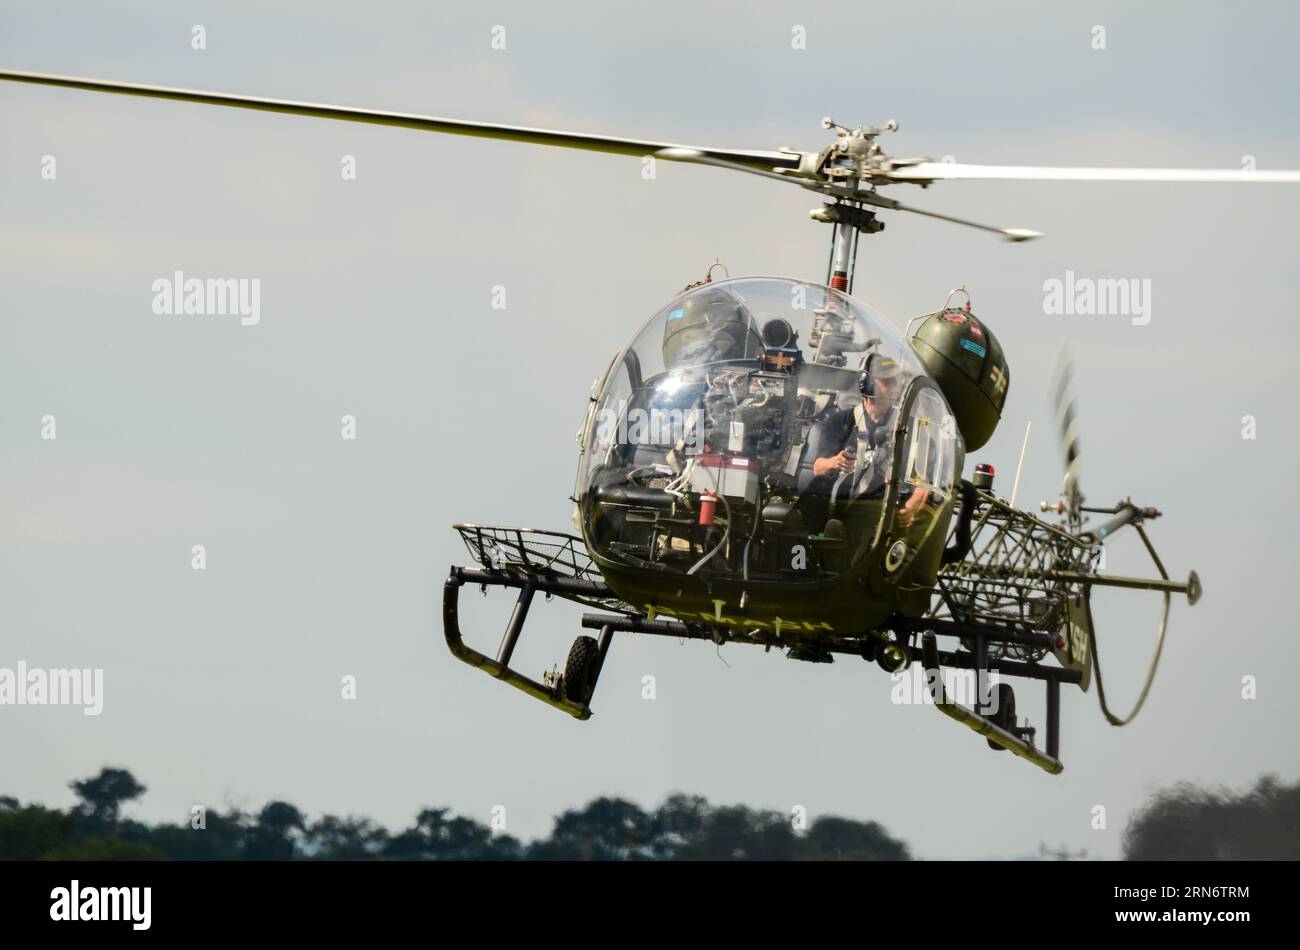 Bell 47G vintage helicopter G-MASH representing the medical evacuation helicopter used in the TV programme MASH of the Korean War, flying at airshow Stock Photo